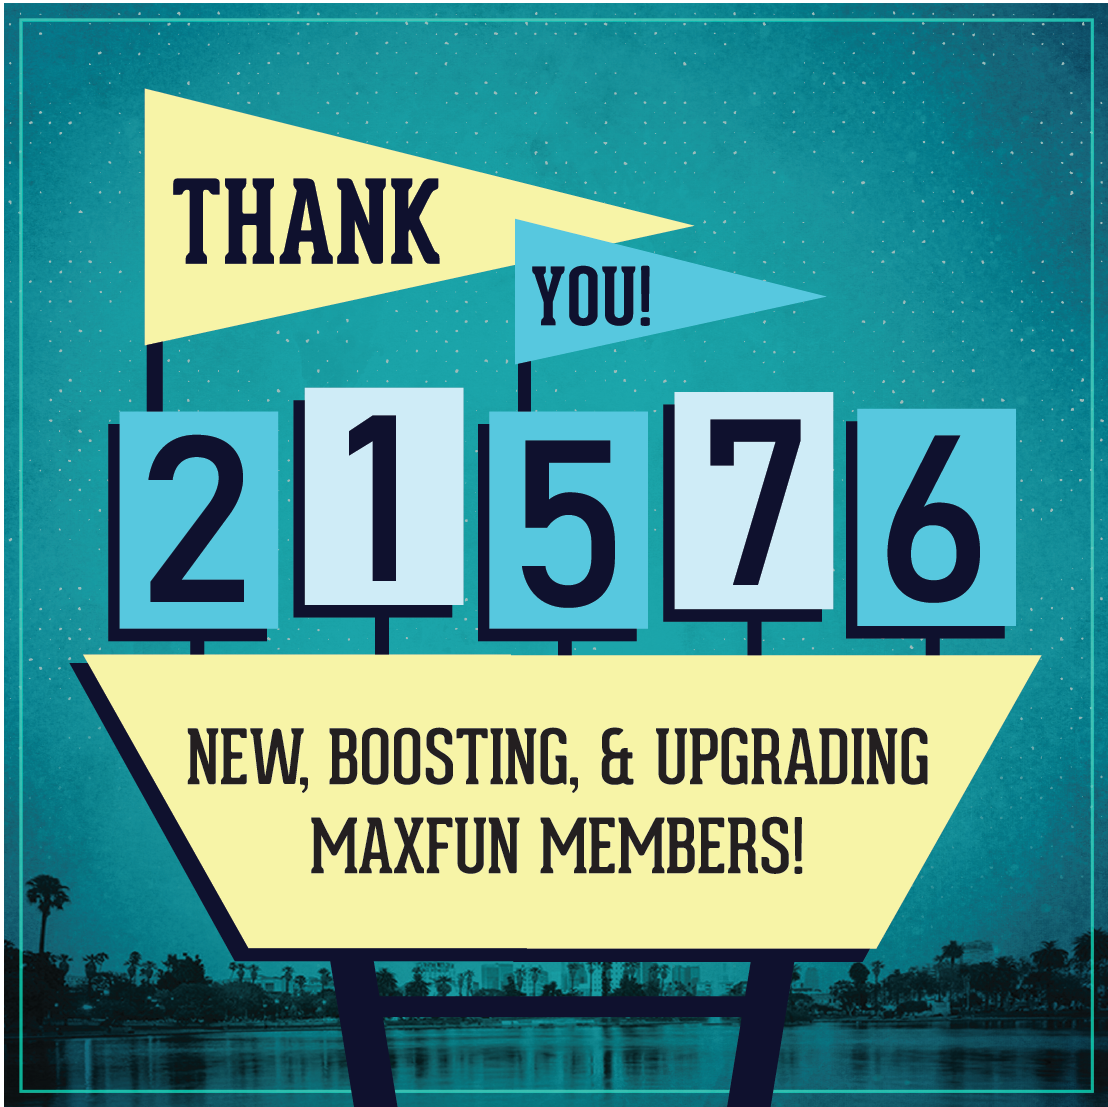 Blue background with a sign that says 'Thank you! 21576 new, boosting, and upgrading MaxFun members!